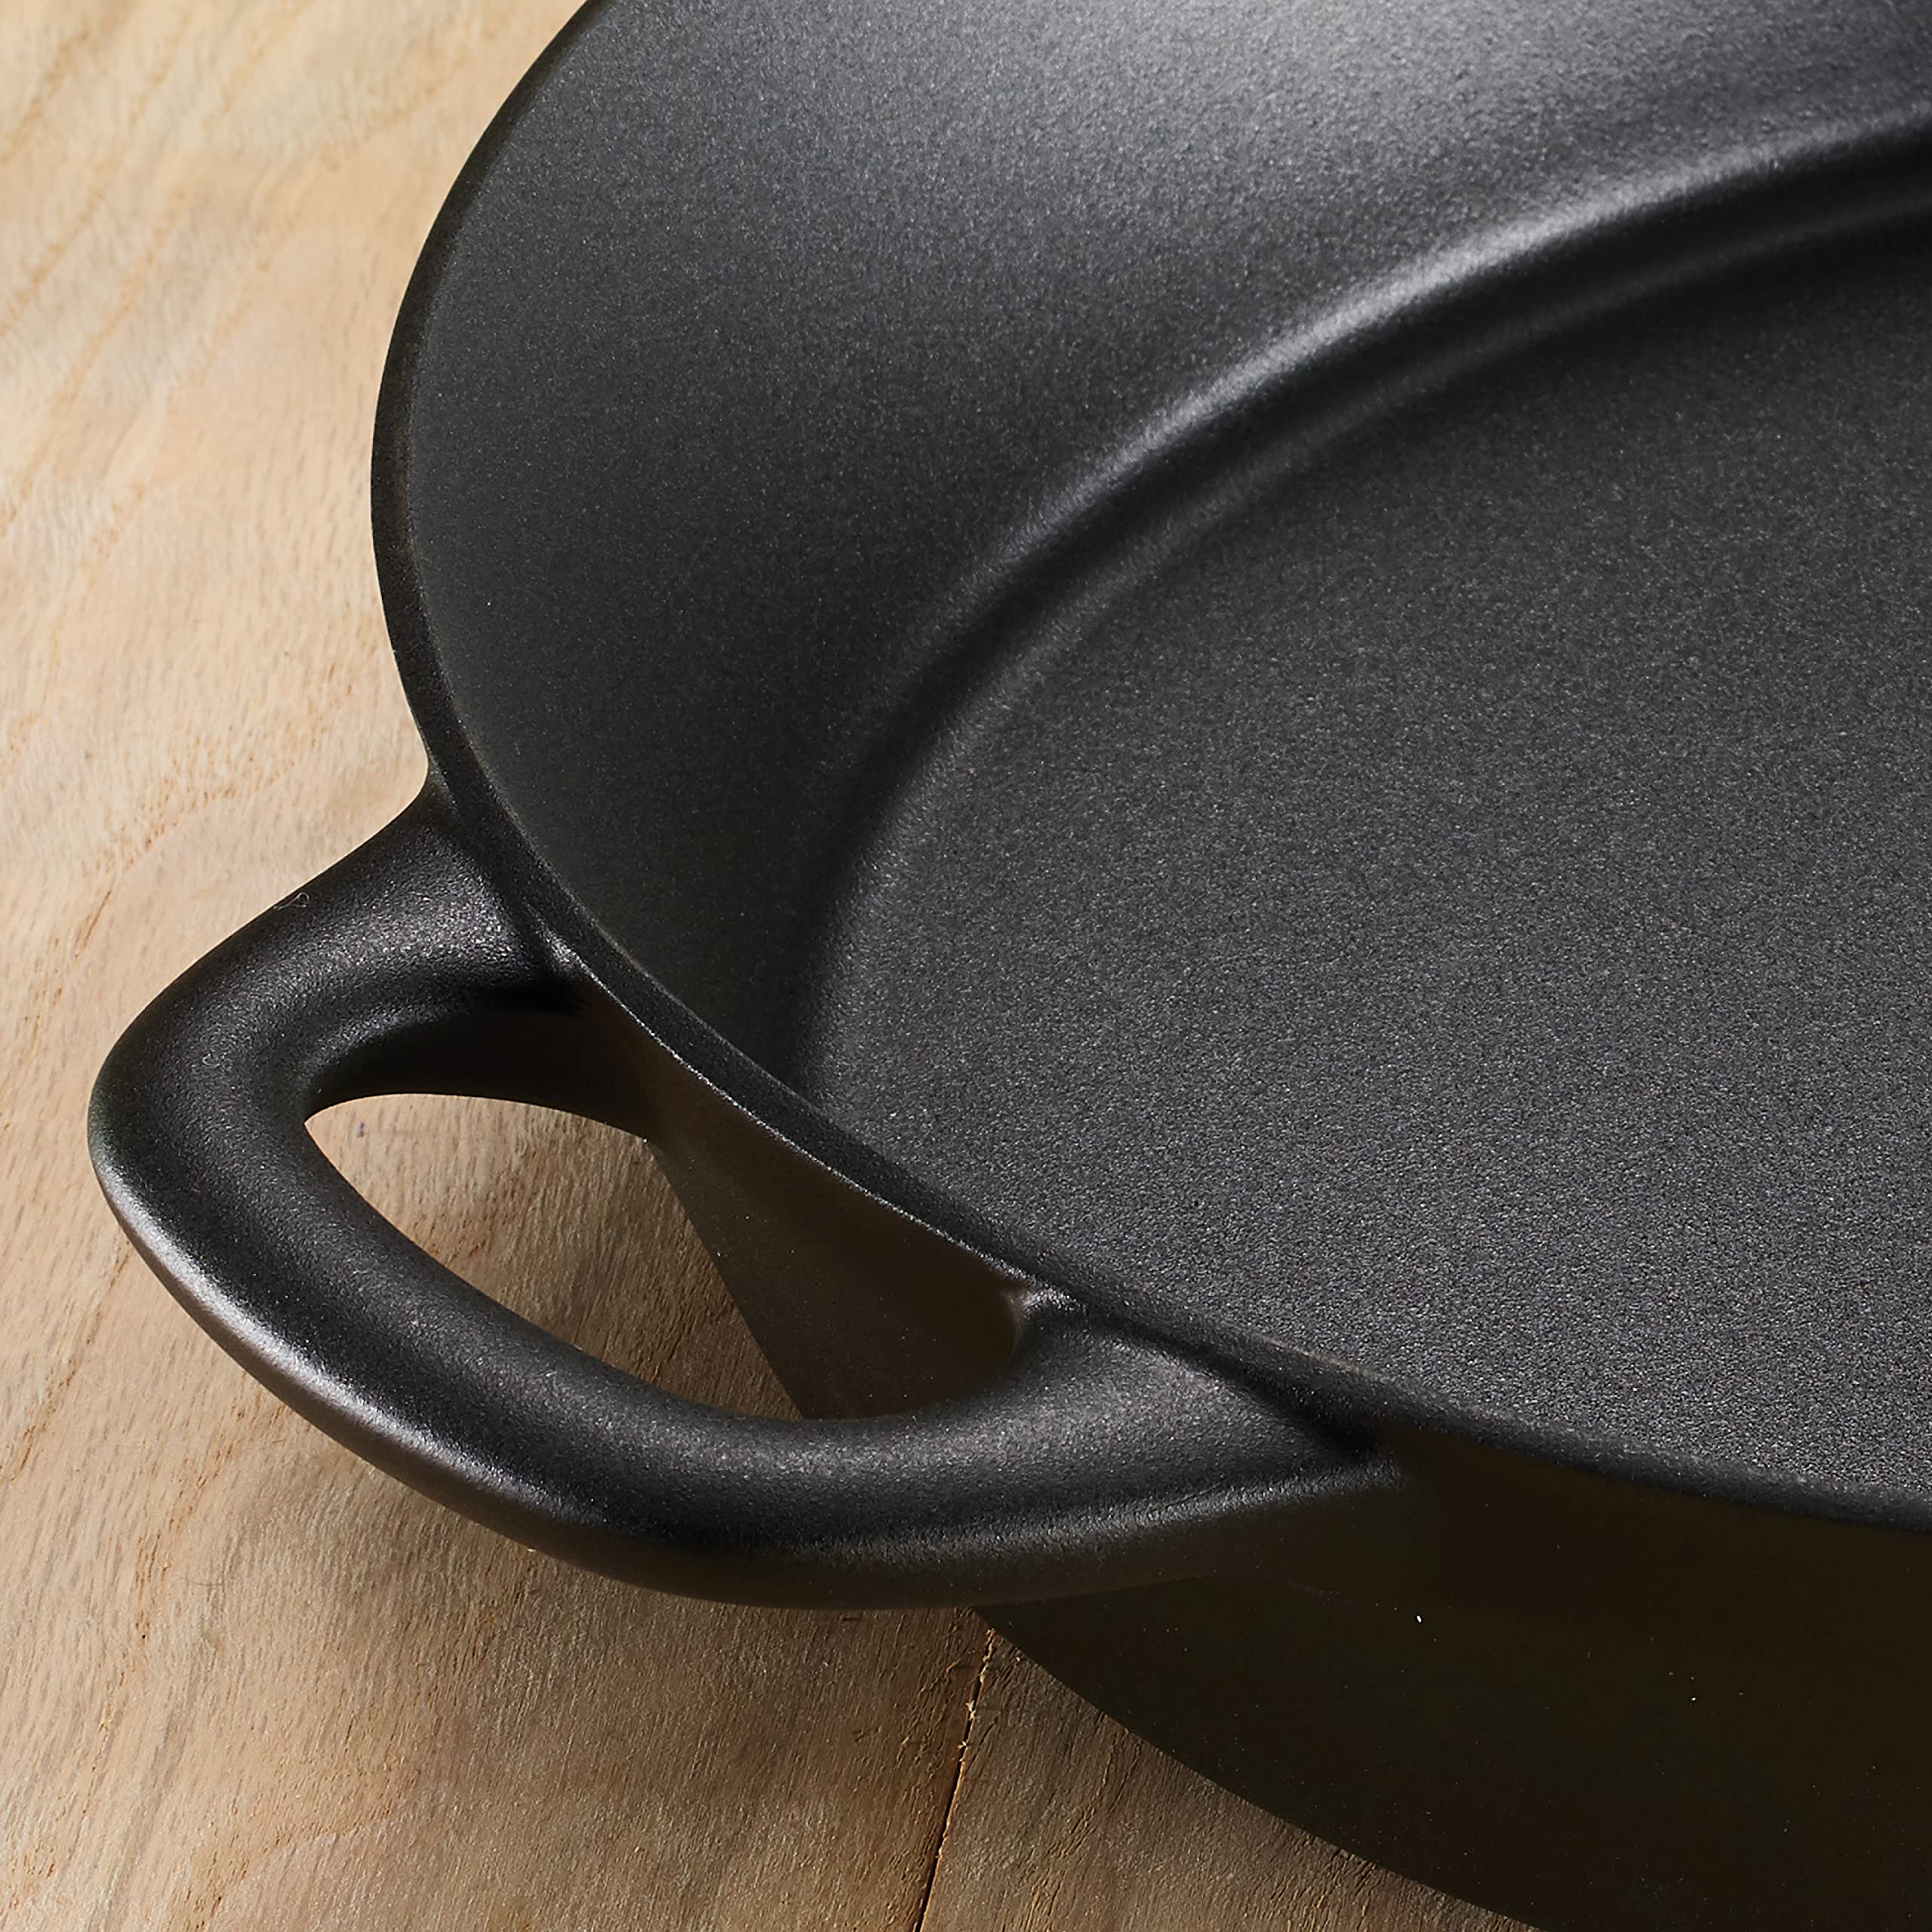 Tramontina Covered Cast Iron Skillet 12.5 inch, 80131/340DS